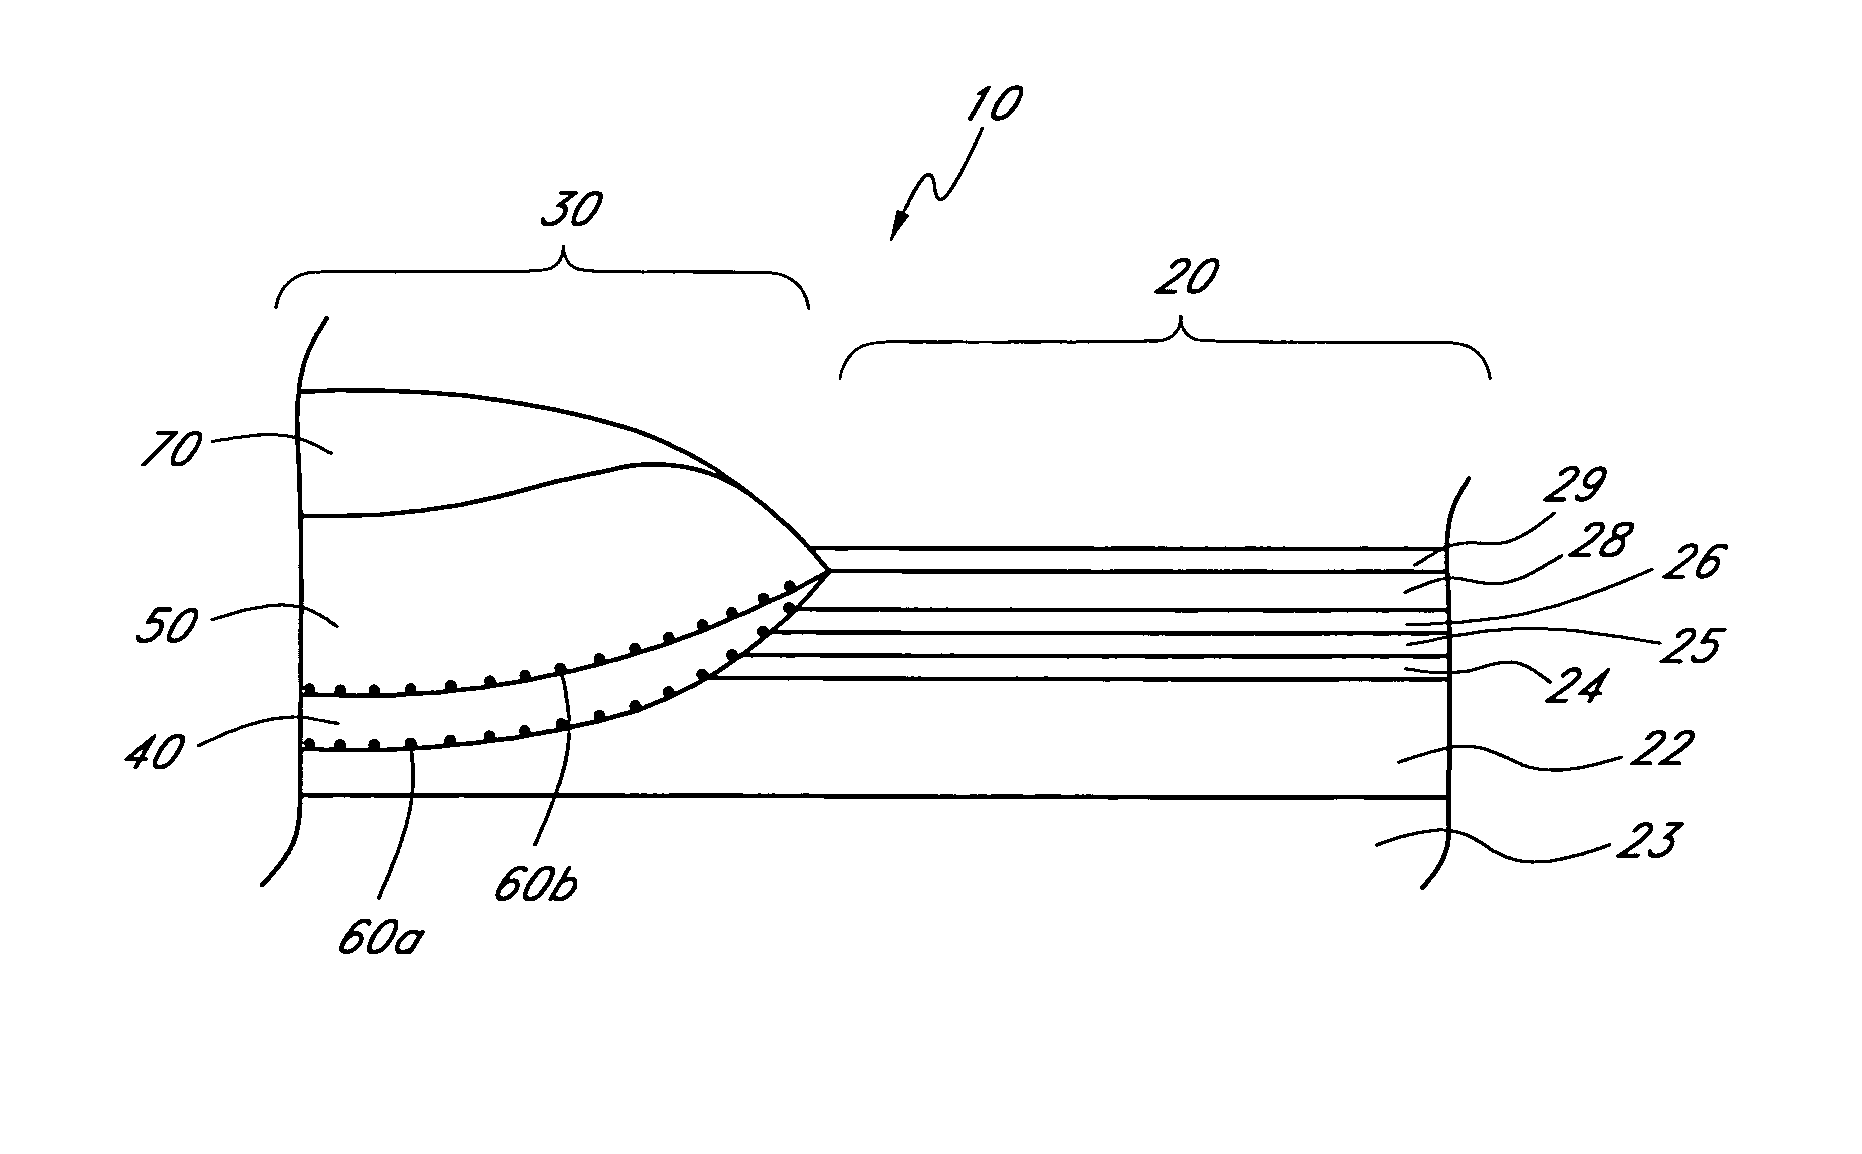 Magnetoresistive read head having a bias structure with at least one dusting layer